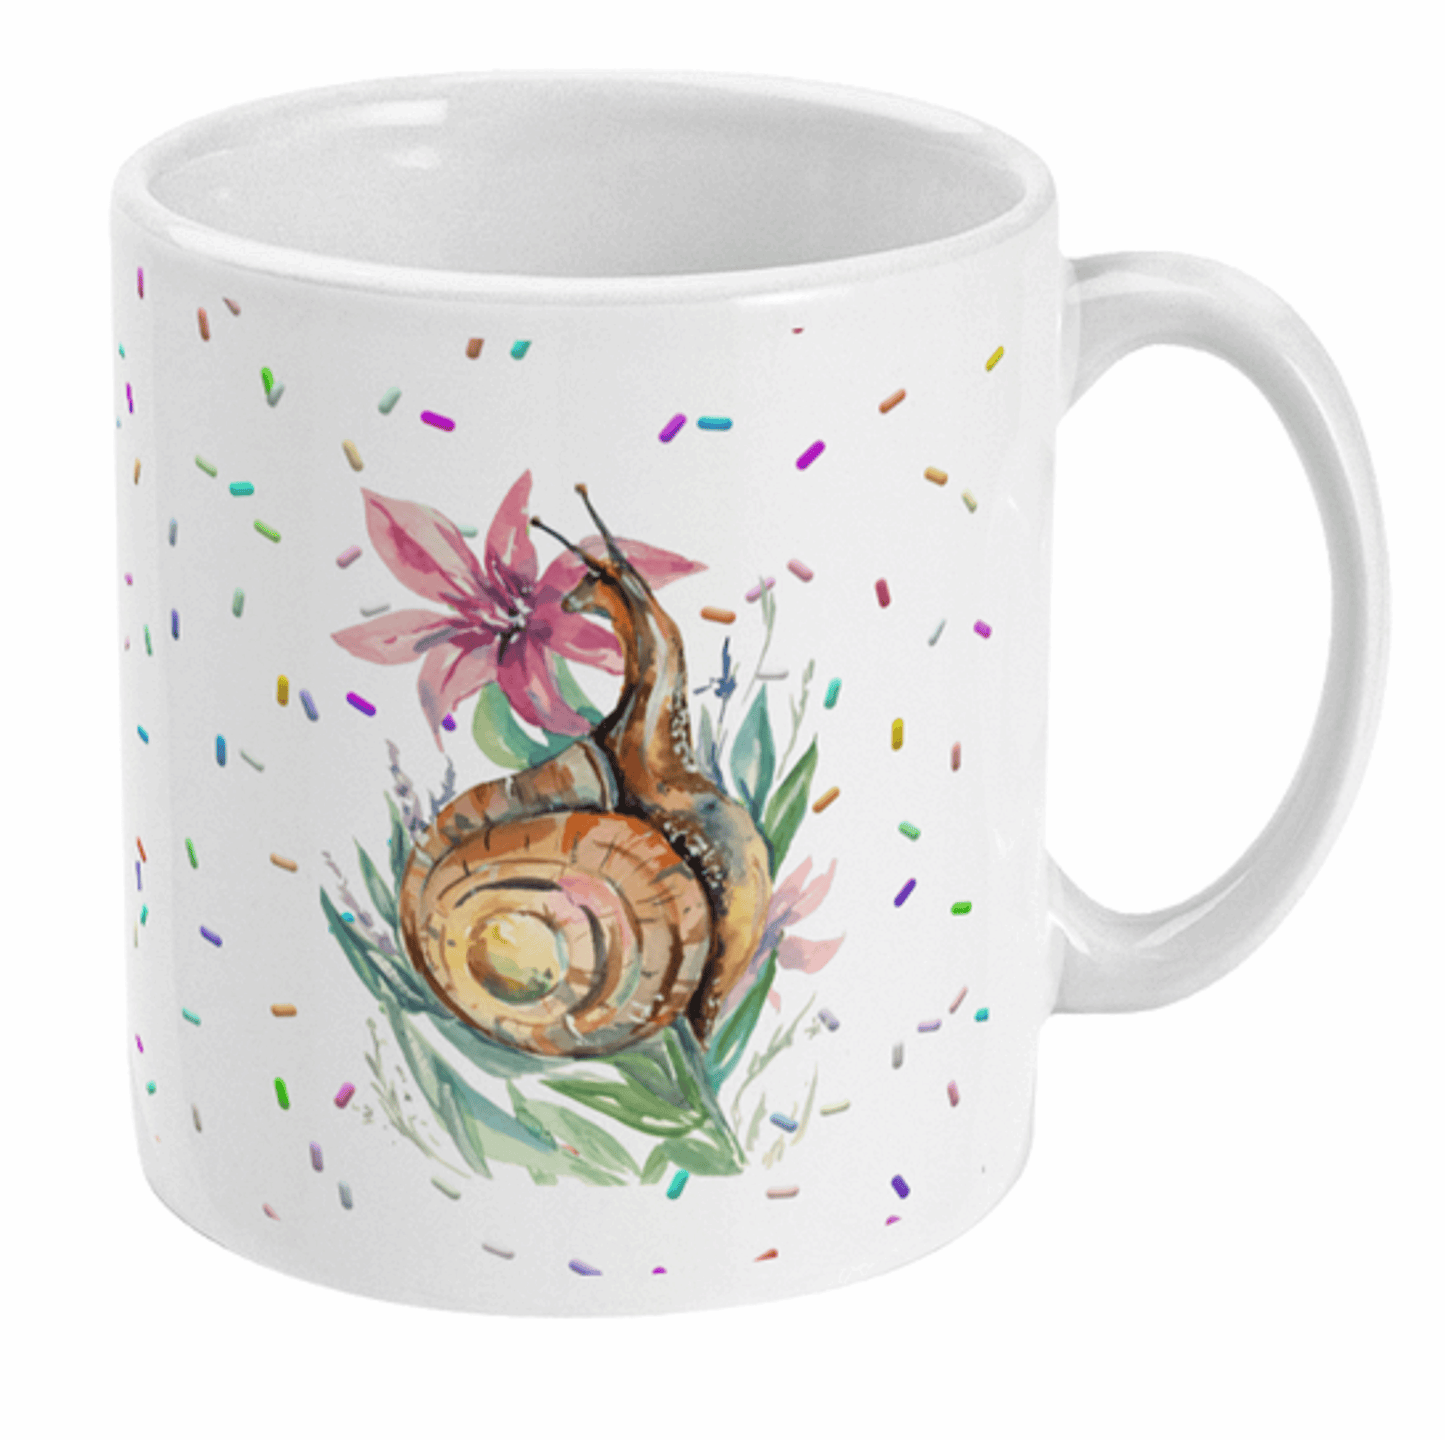  Watercolour Snail and Flower Coffee Mug by Free Spirit Accessories sold by Free Spirit Accessories